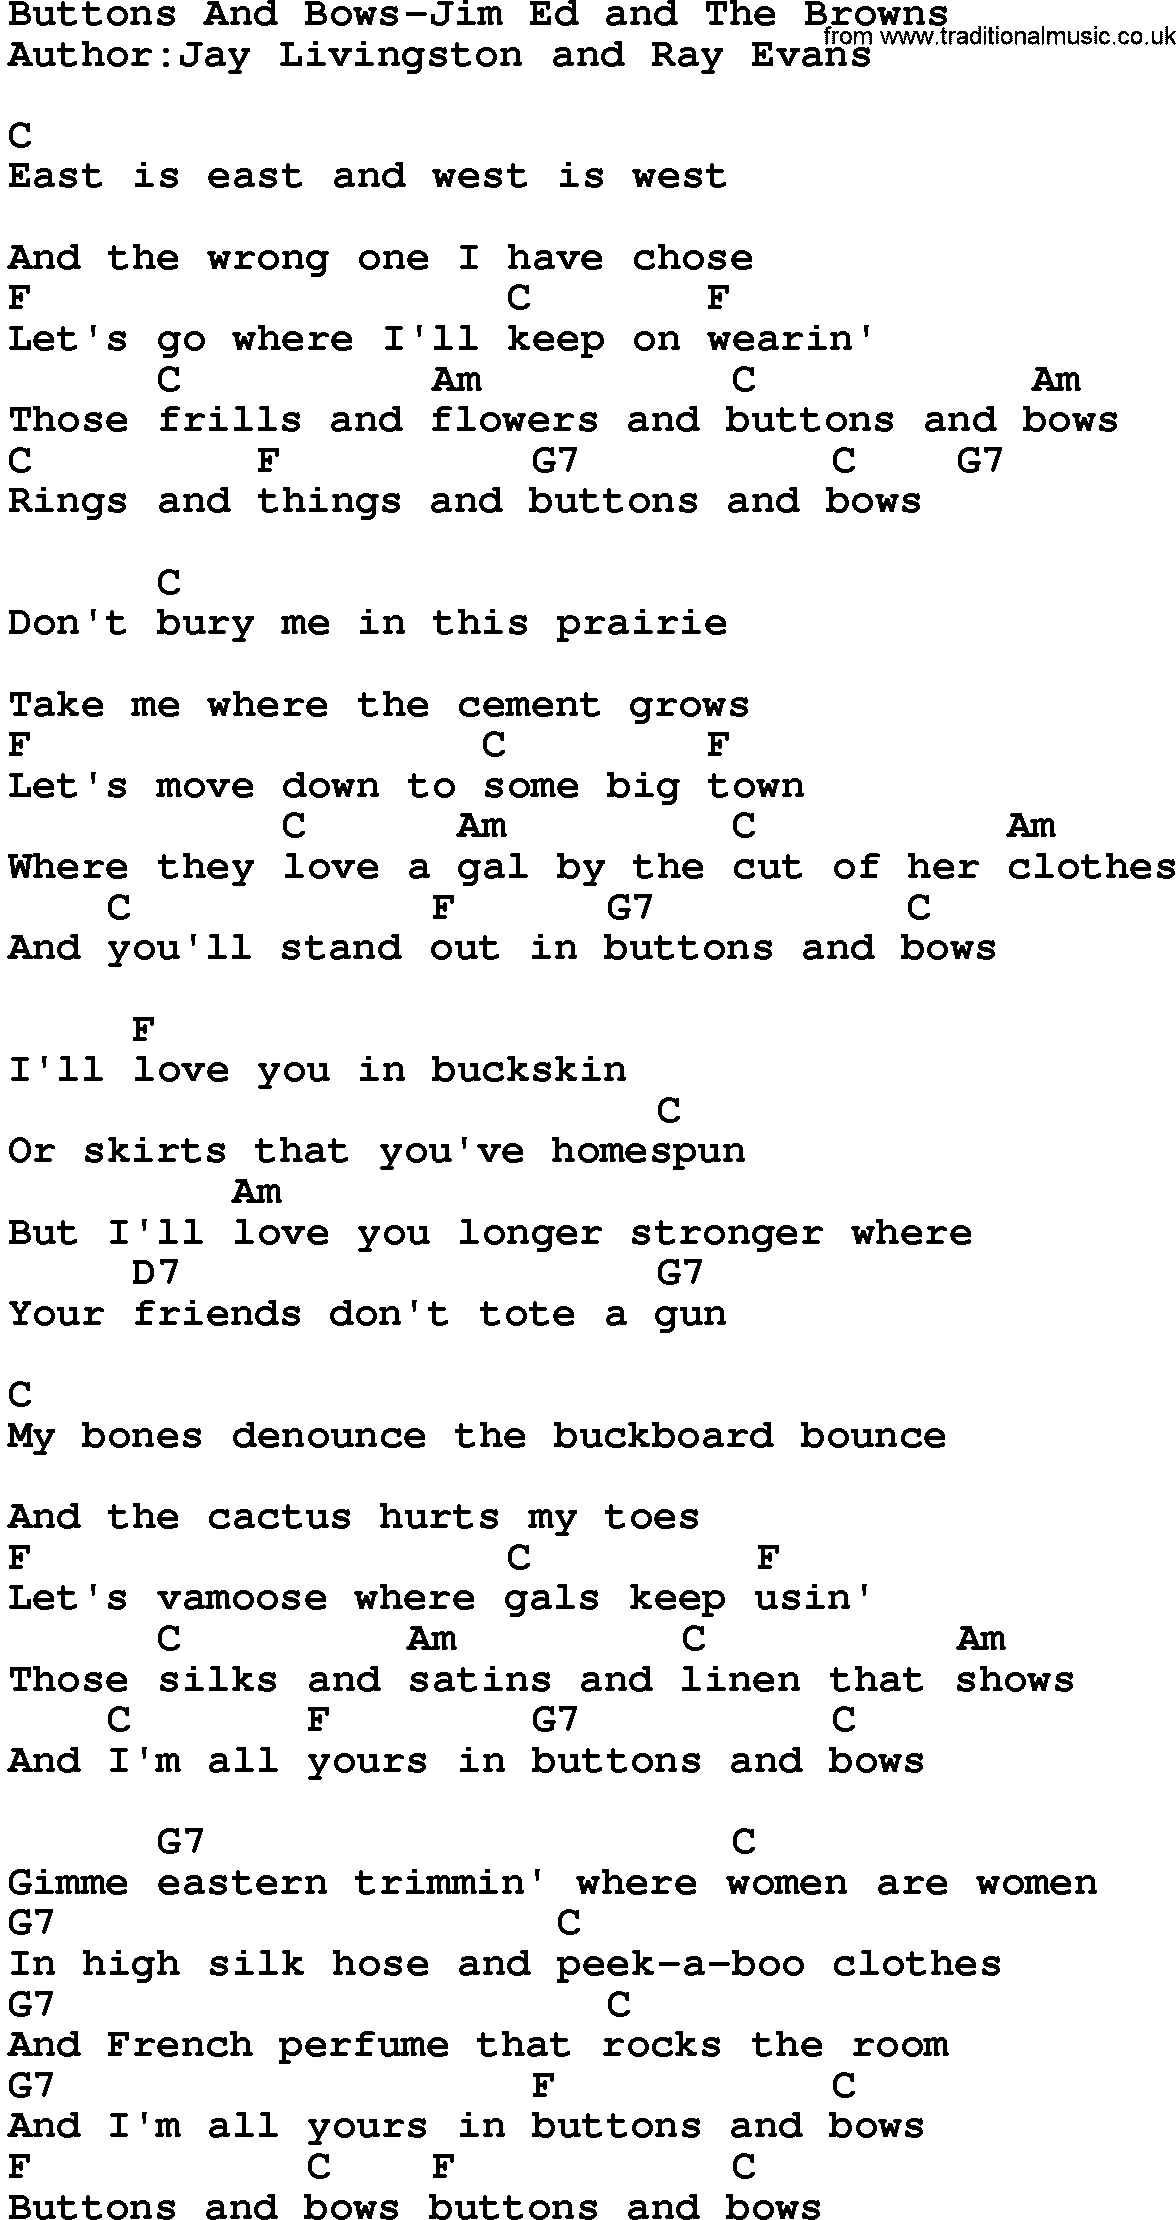 Country music song: Buttons And Bows-Jim Ed And The Browns lyrics and chords